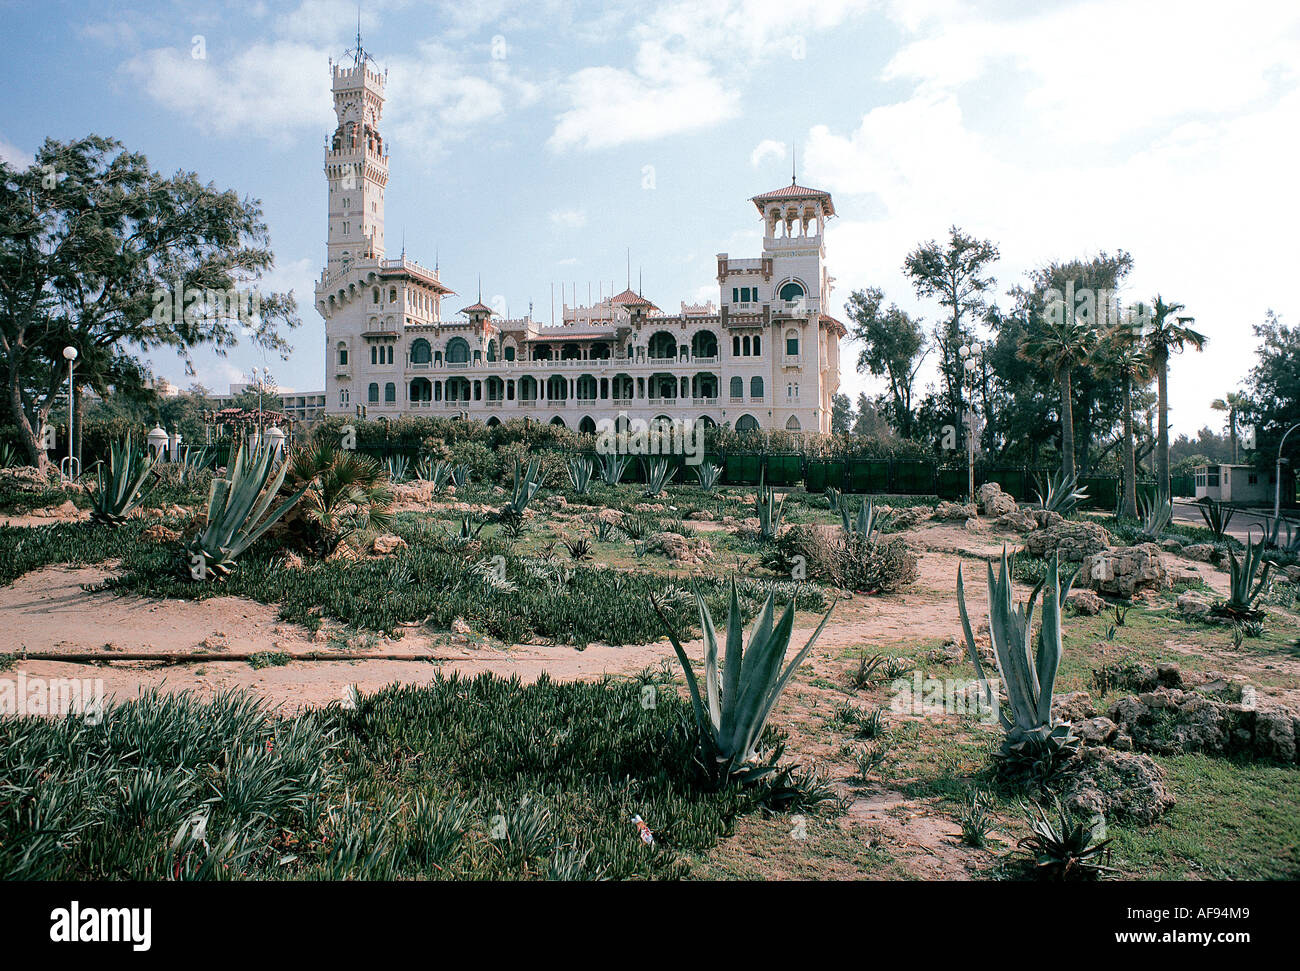 The Montaza Palace Alexandria Egypt This was once King Farouk s Palace Stock Photo